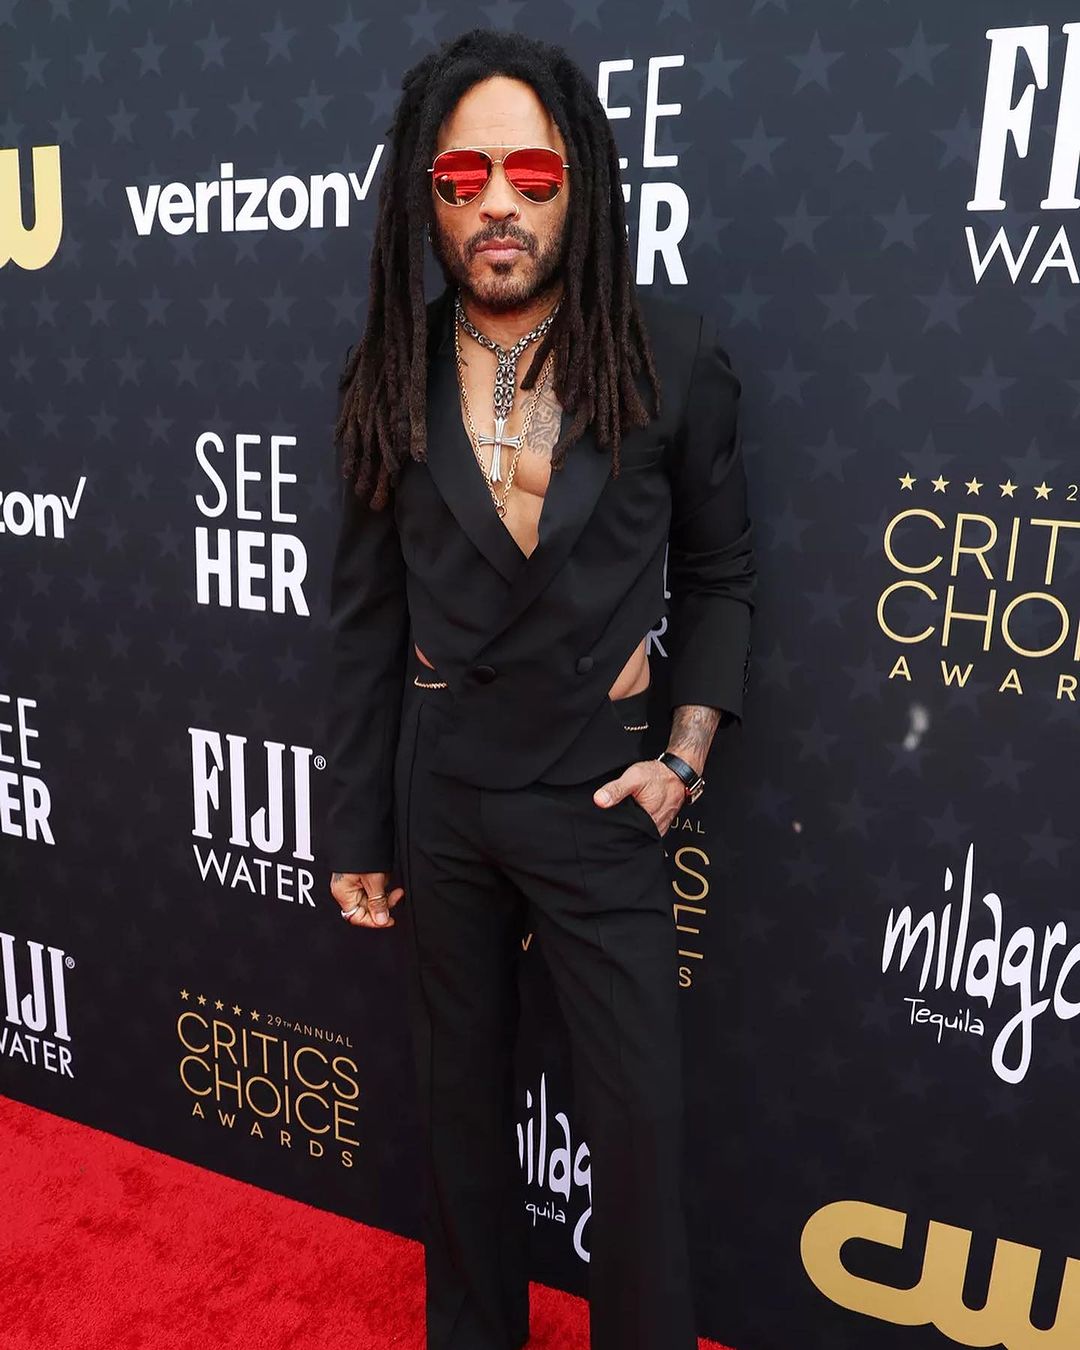 Kravitz Whose “Road to Freedom,” written for “Rustin” nominated for best song, experimented with cutout suiting for the 2024 Critics Choice Awards red carpet. The rock star wore an all-black ensemble that featured a jacket that crossed in the front in a way that showed off hints of skin on the side and back. He topped the outfit off with a stack of necklaces, a thin chain belt, and mirrored shades.